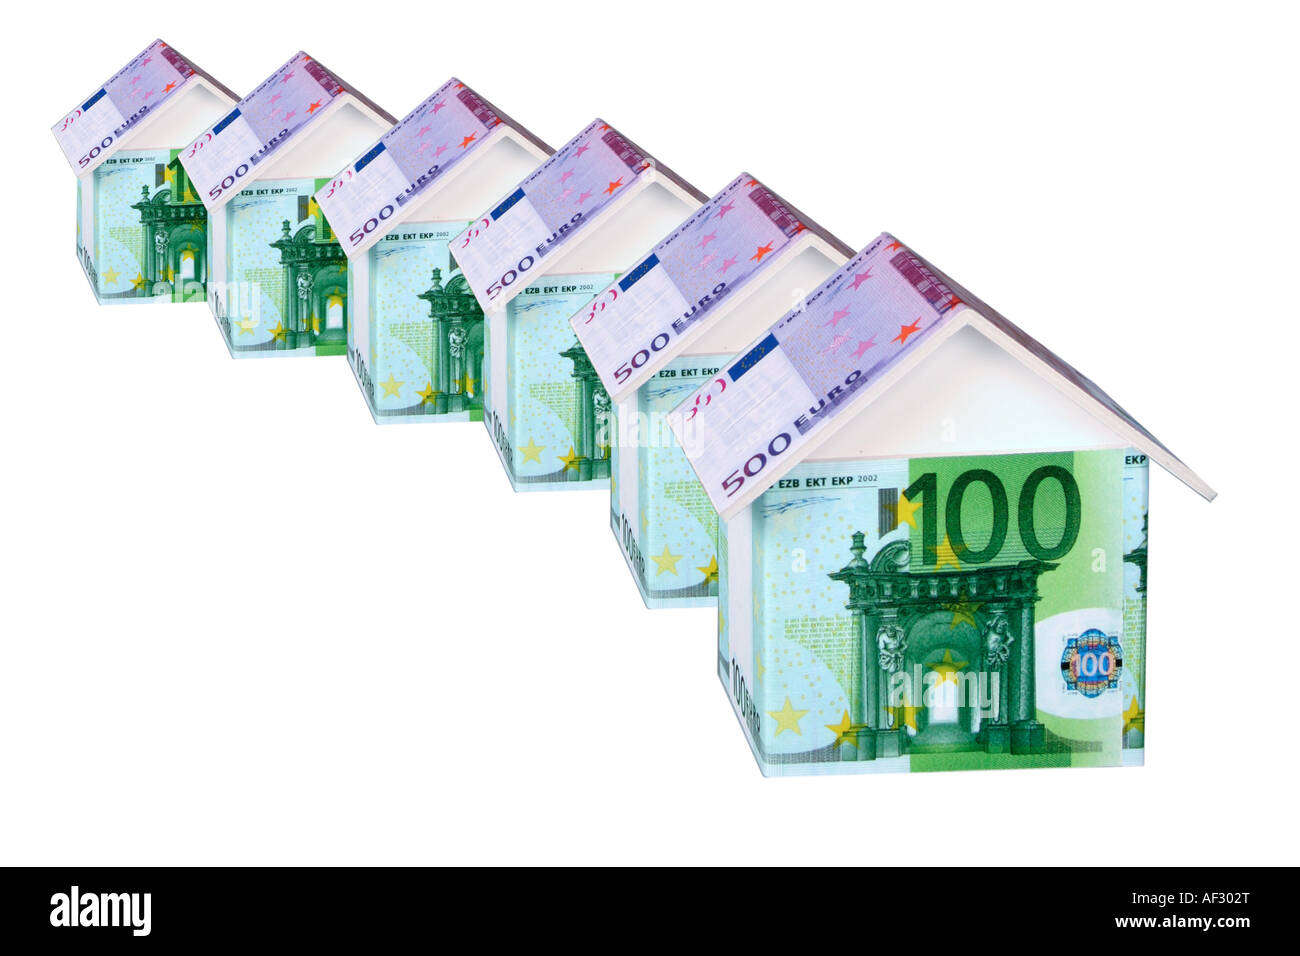 houses of banknotes Stock Photo